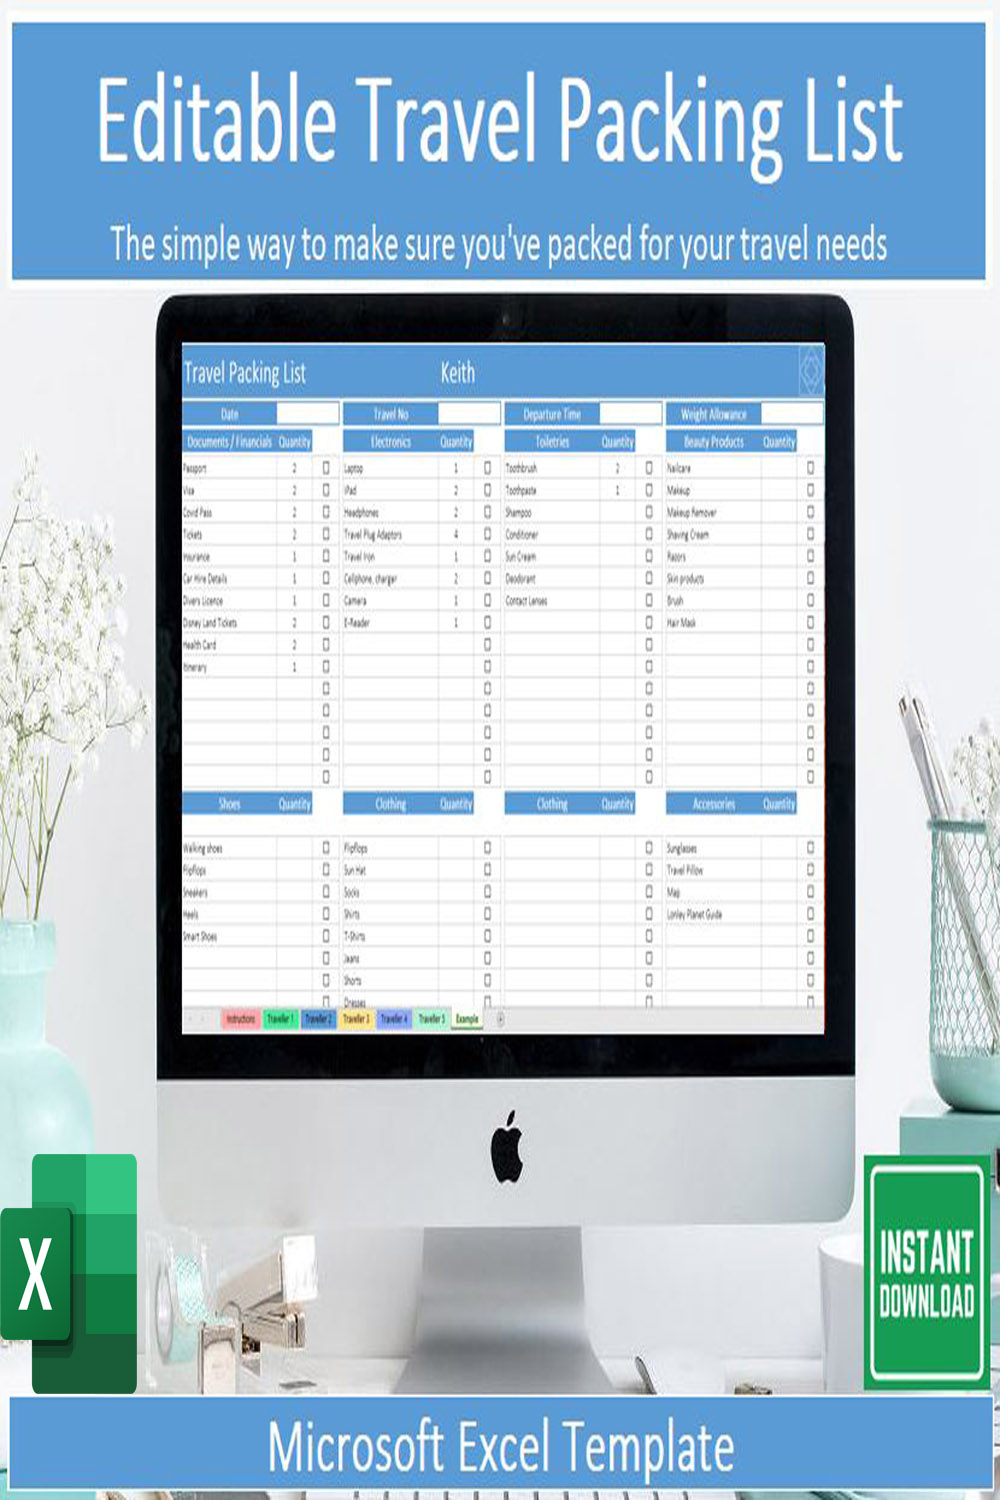 Editable Travel Packing List Template for Microsoft Excel pinterest image.